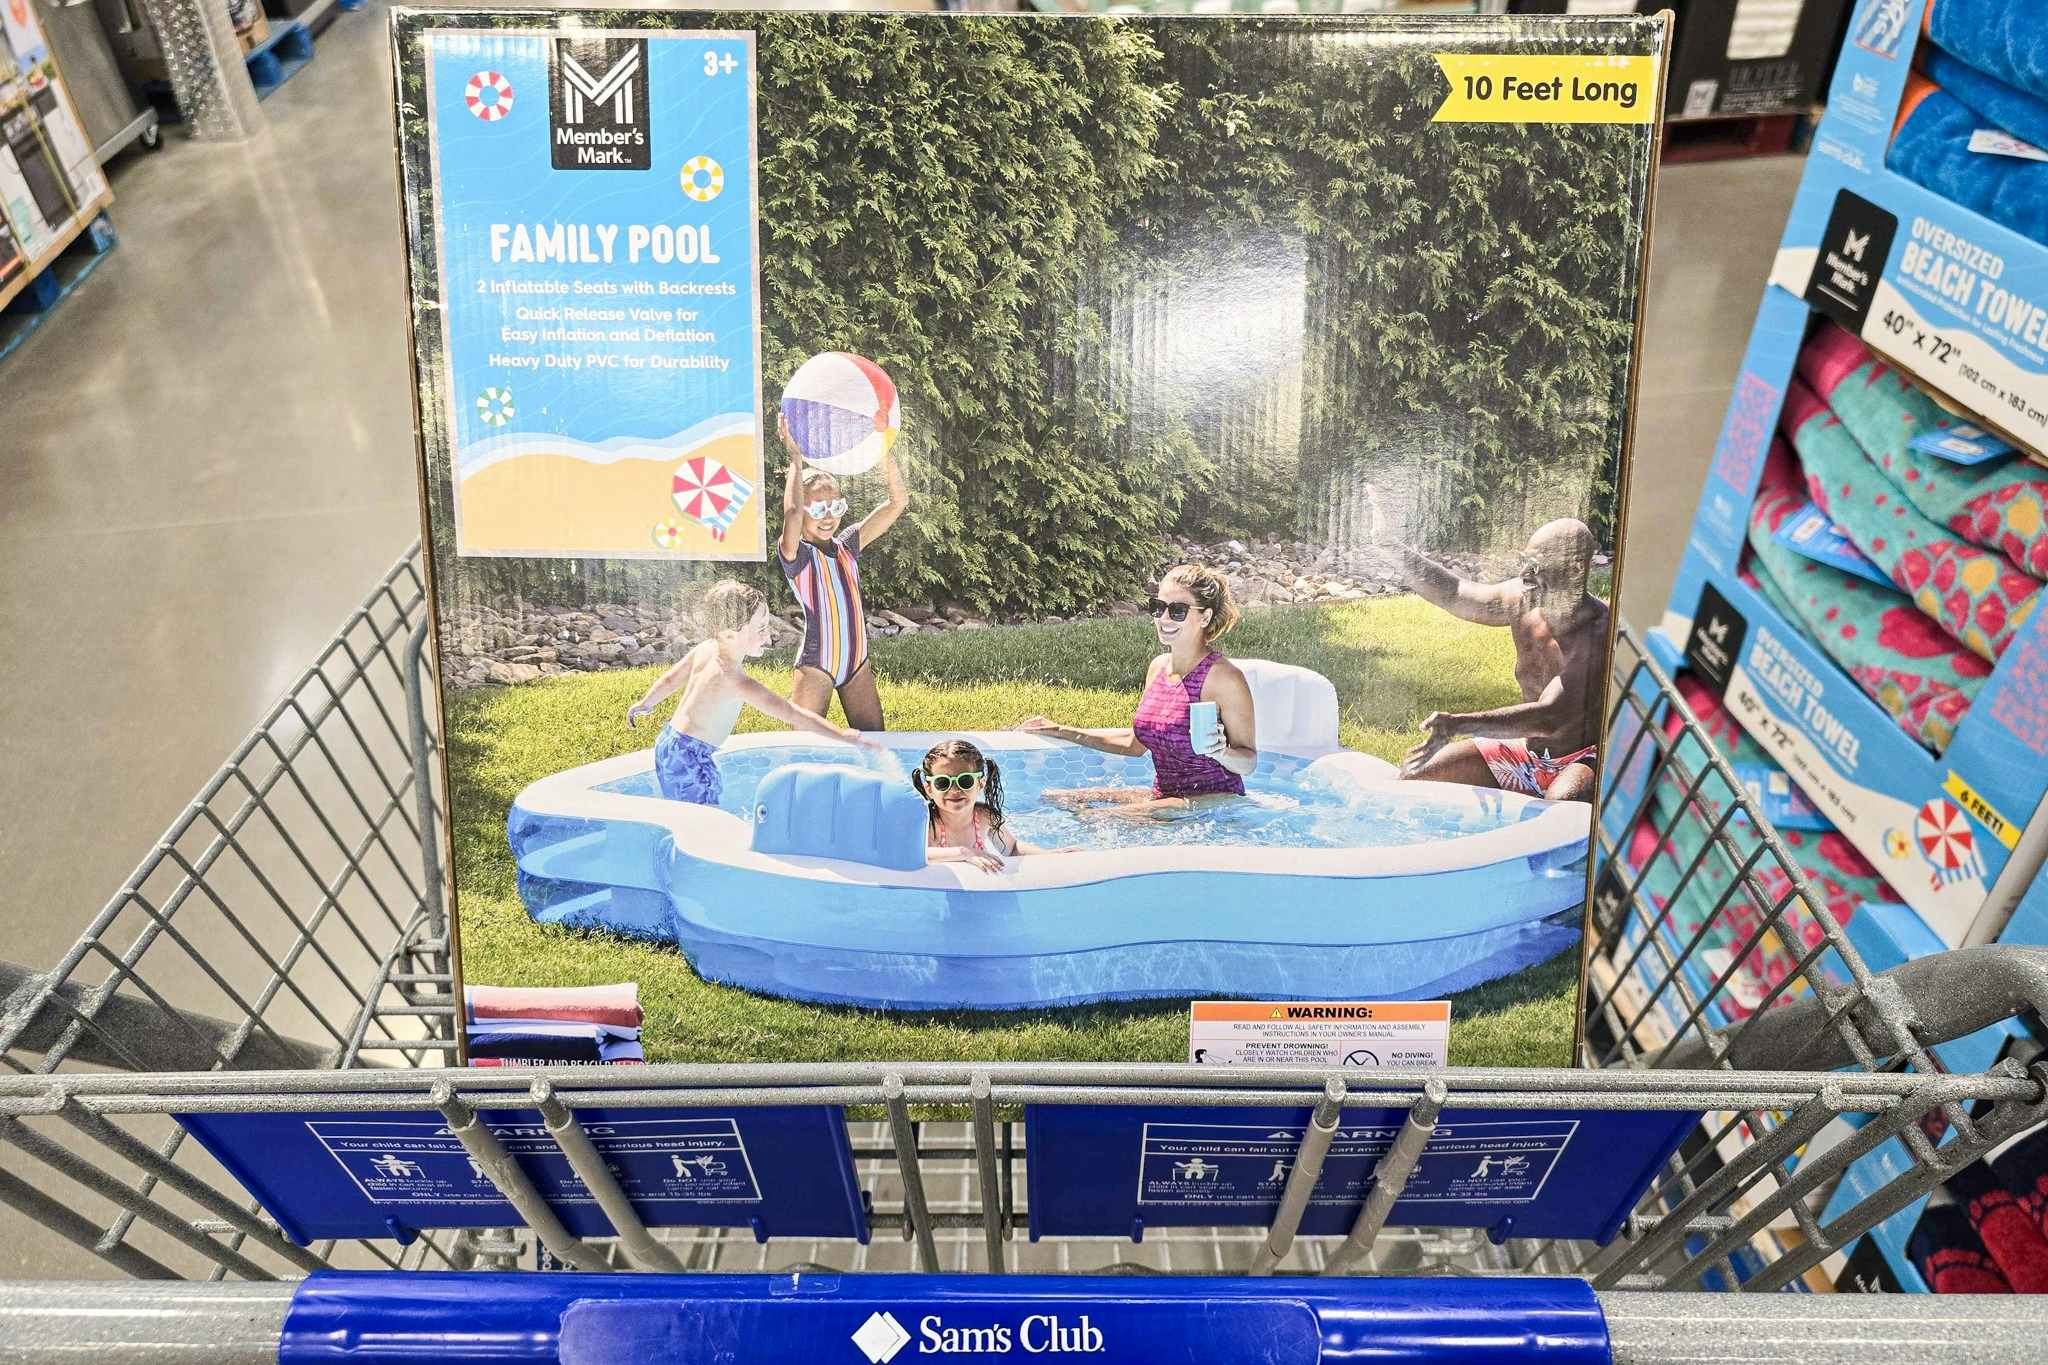 inflatable family pool in a sams club shopping cart